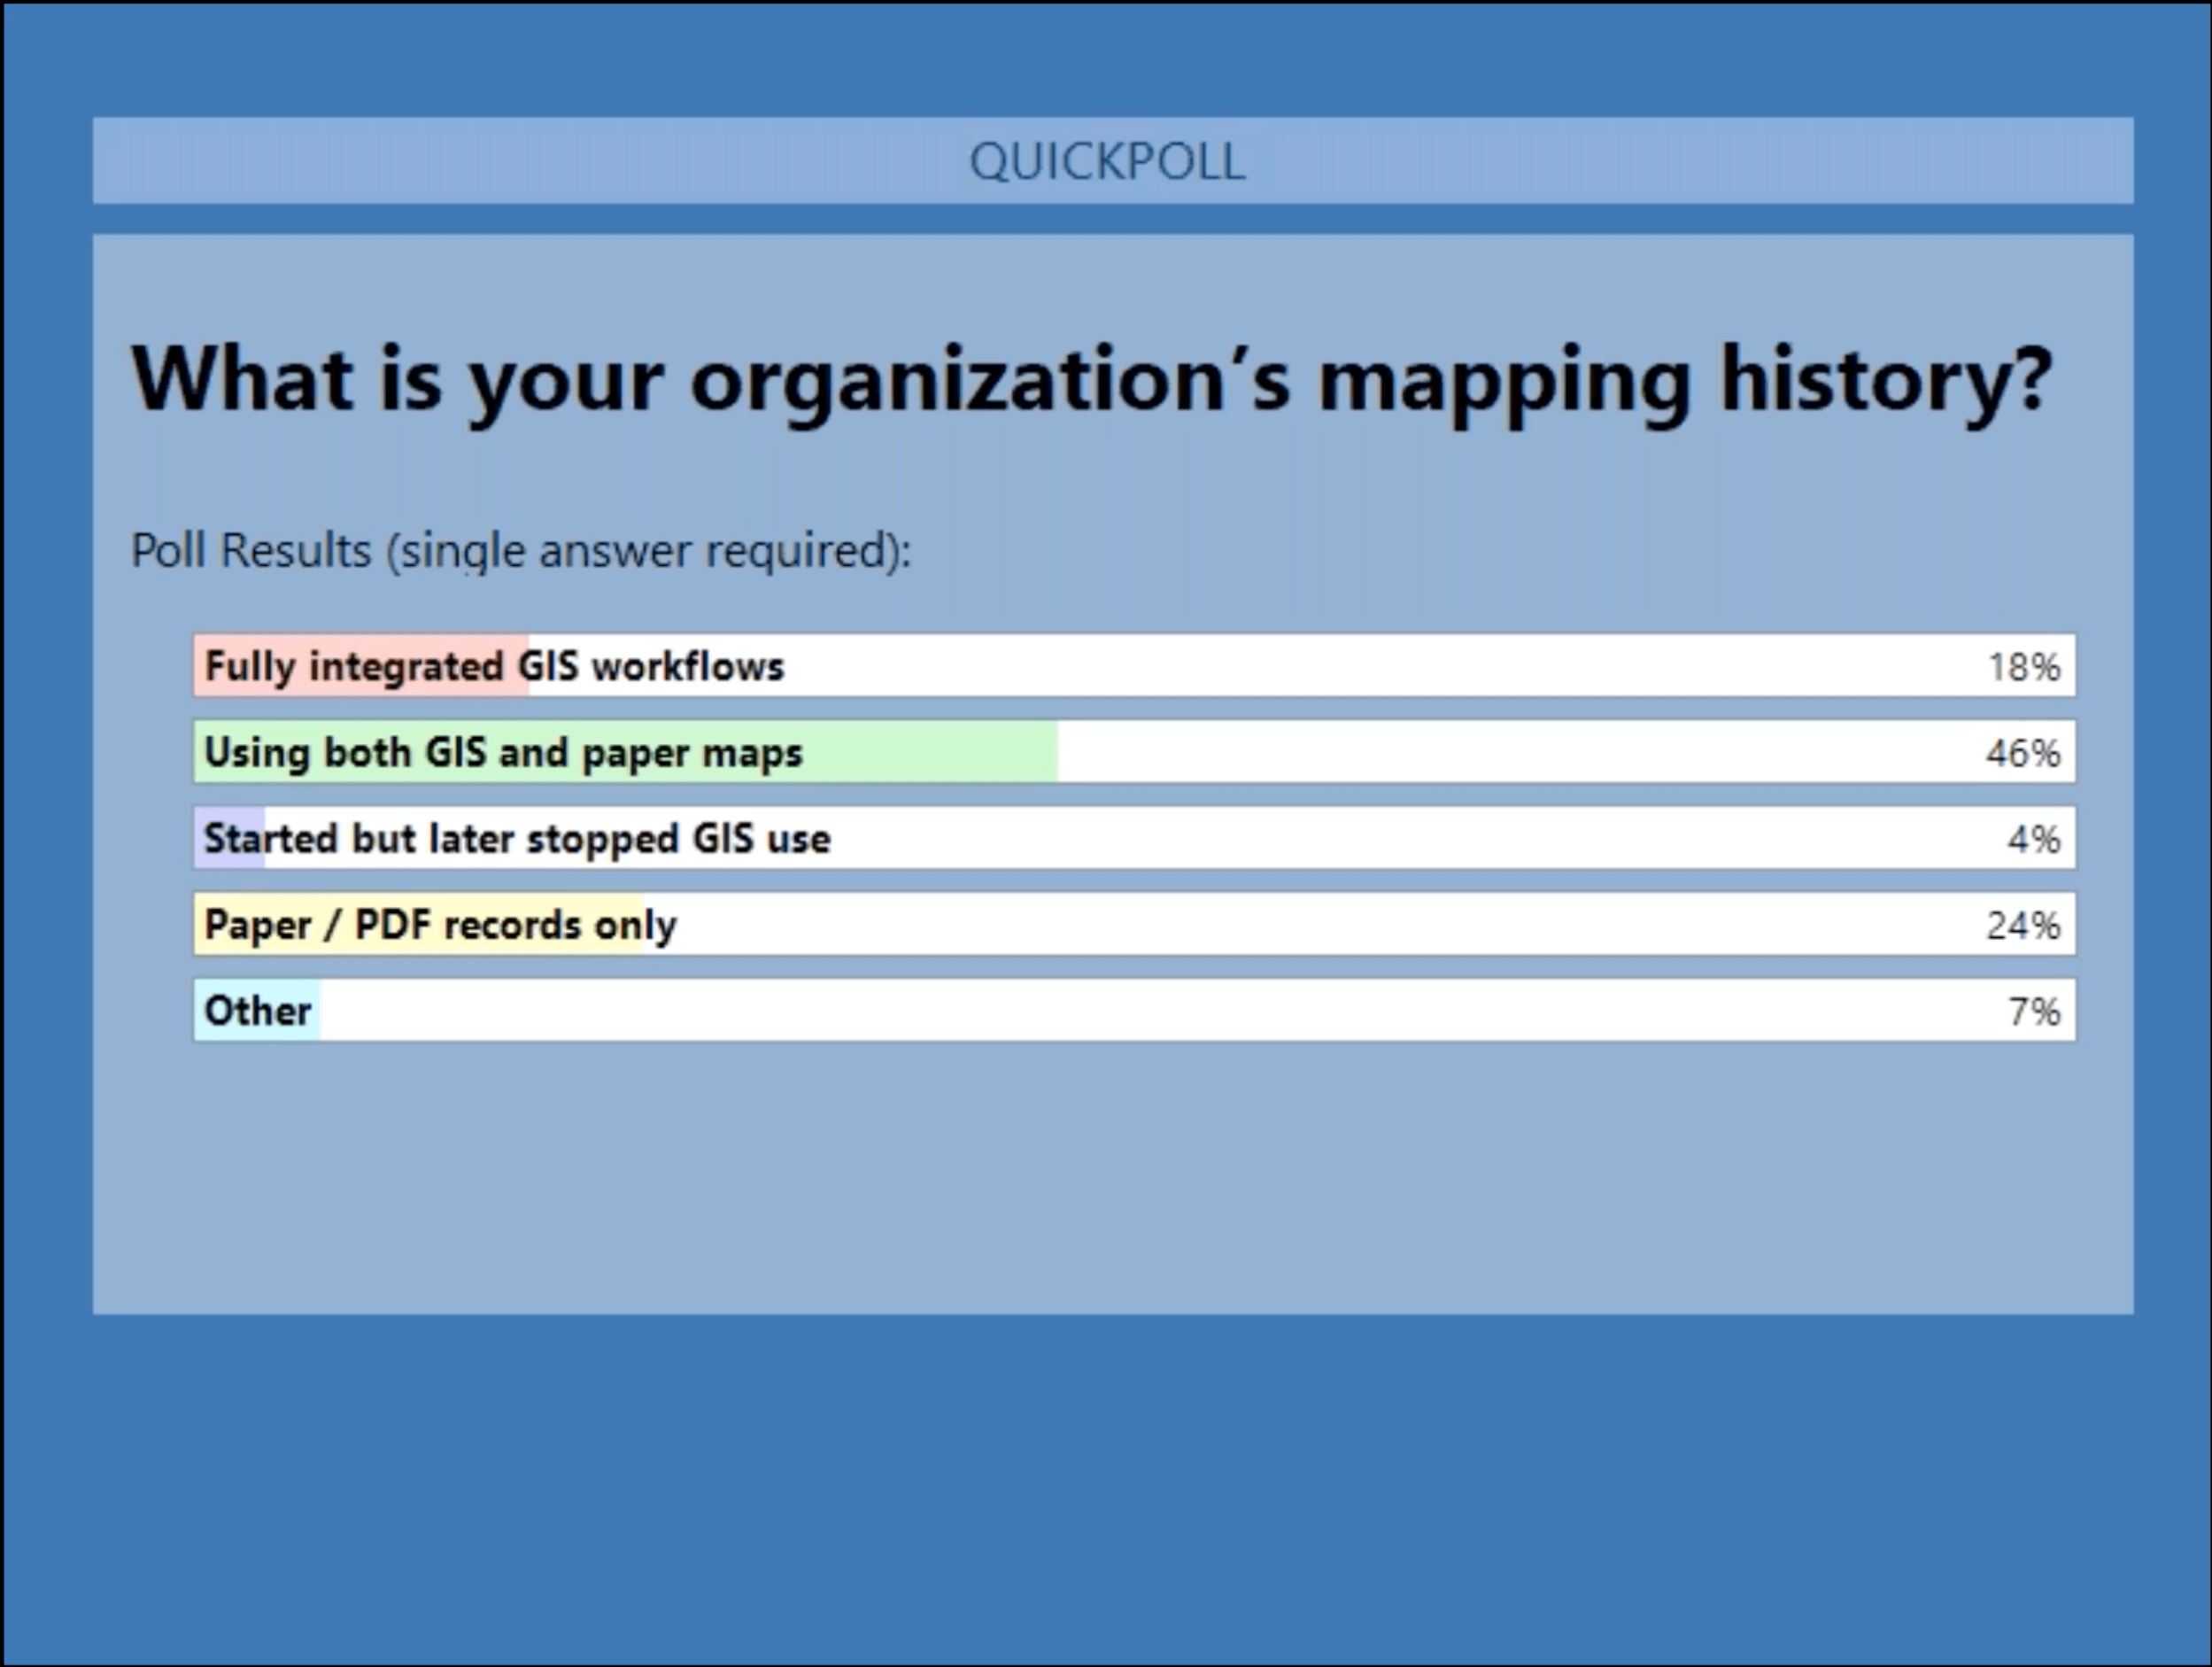 NRWA Eos Webinar Poll: "What is your organization's mapping history?"